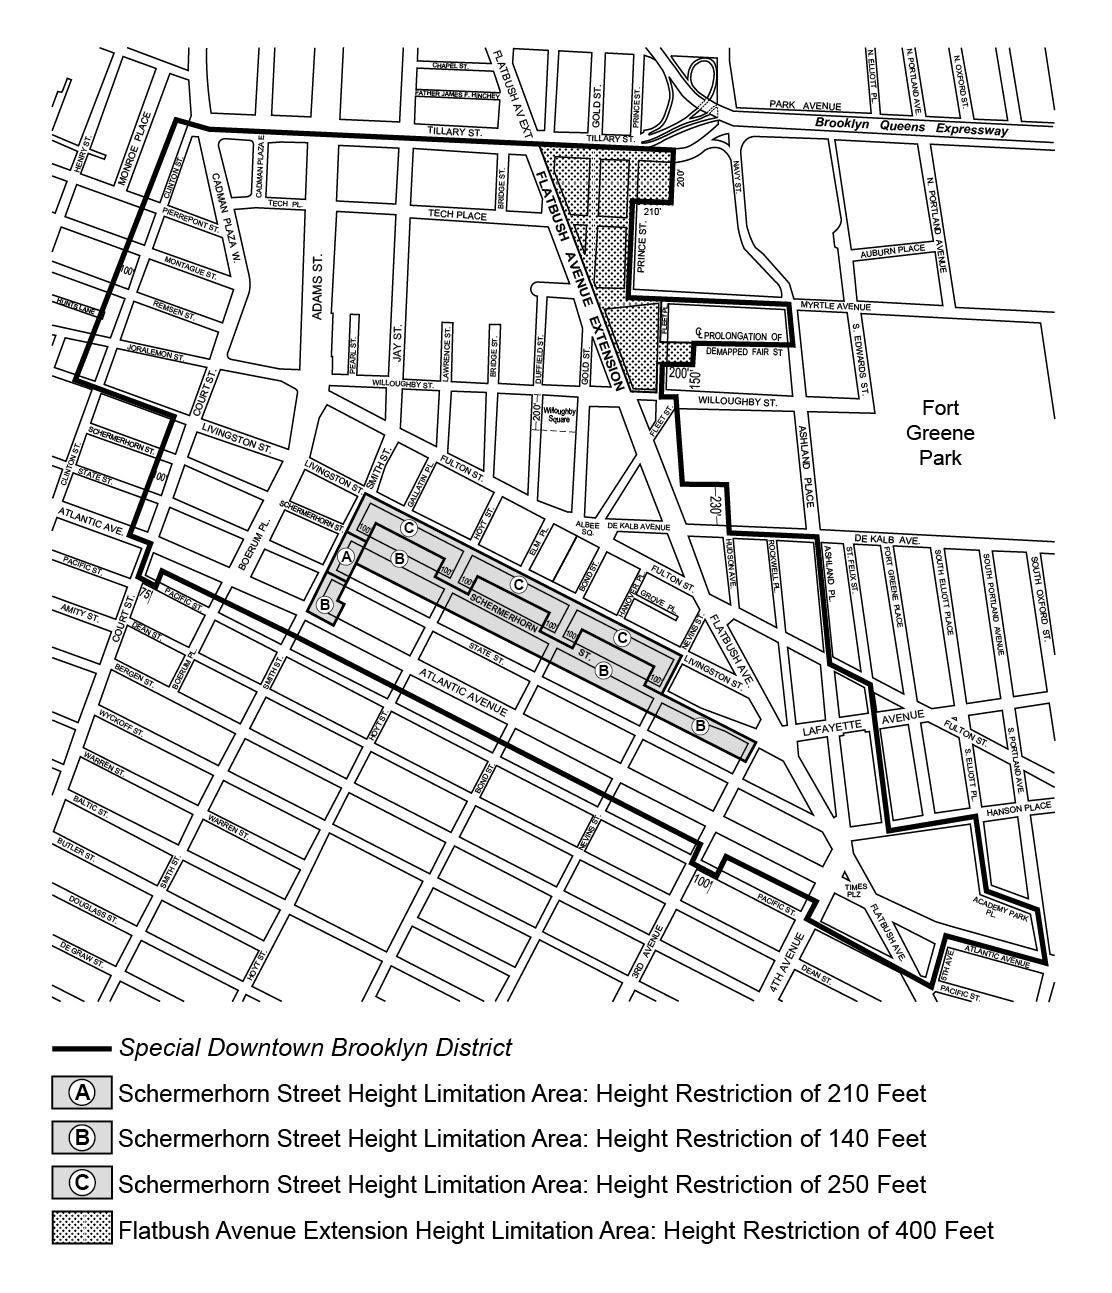 Zoning Resolutions Chapter 1: Special Downtown Brooklyn District Appendix E.5